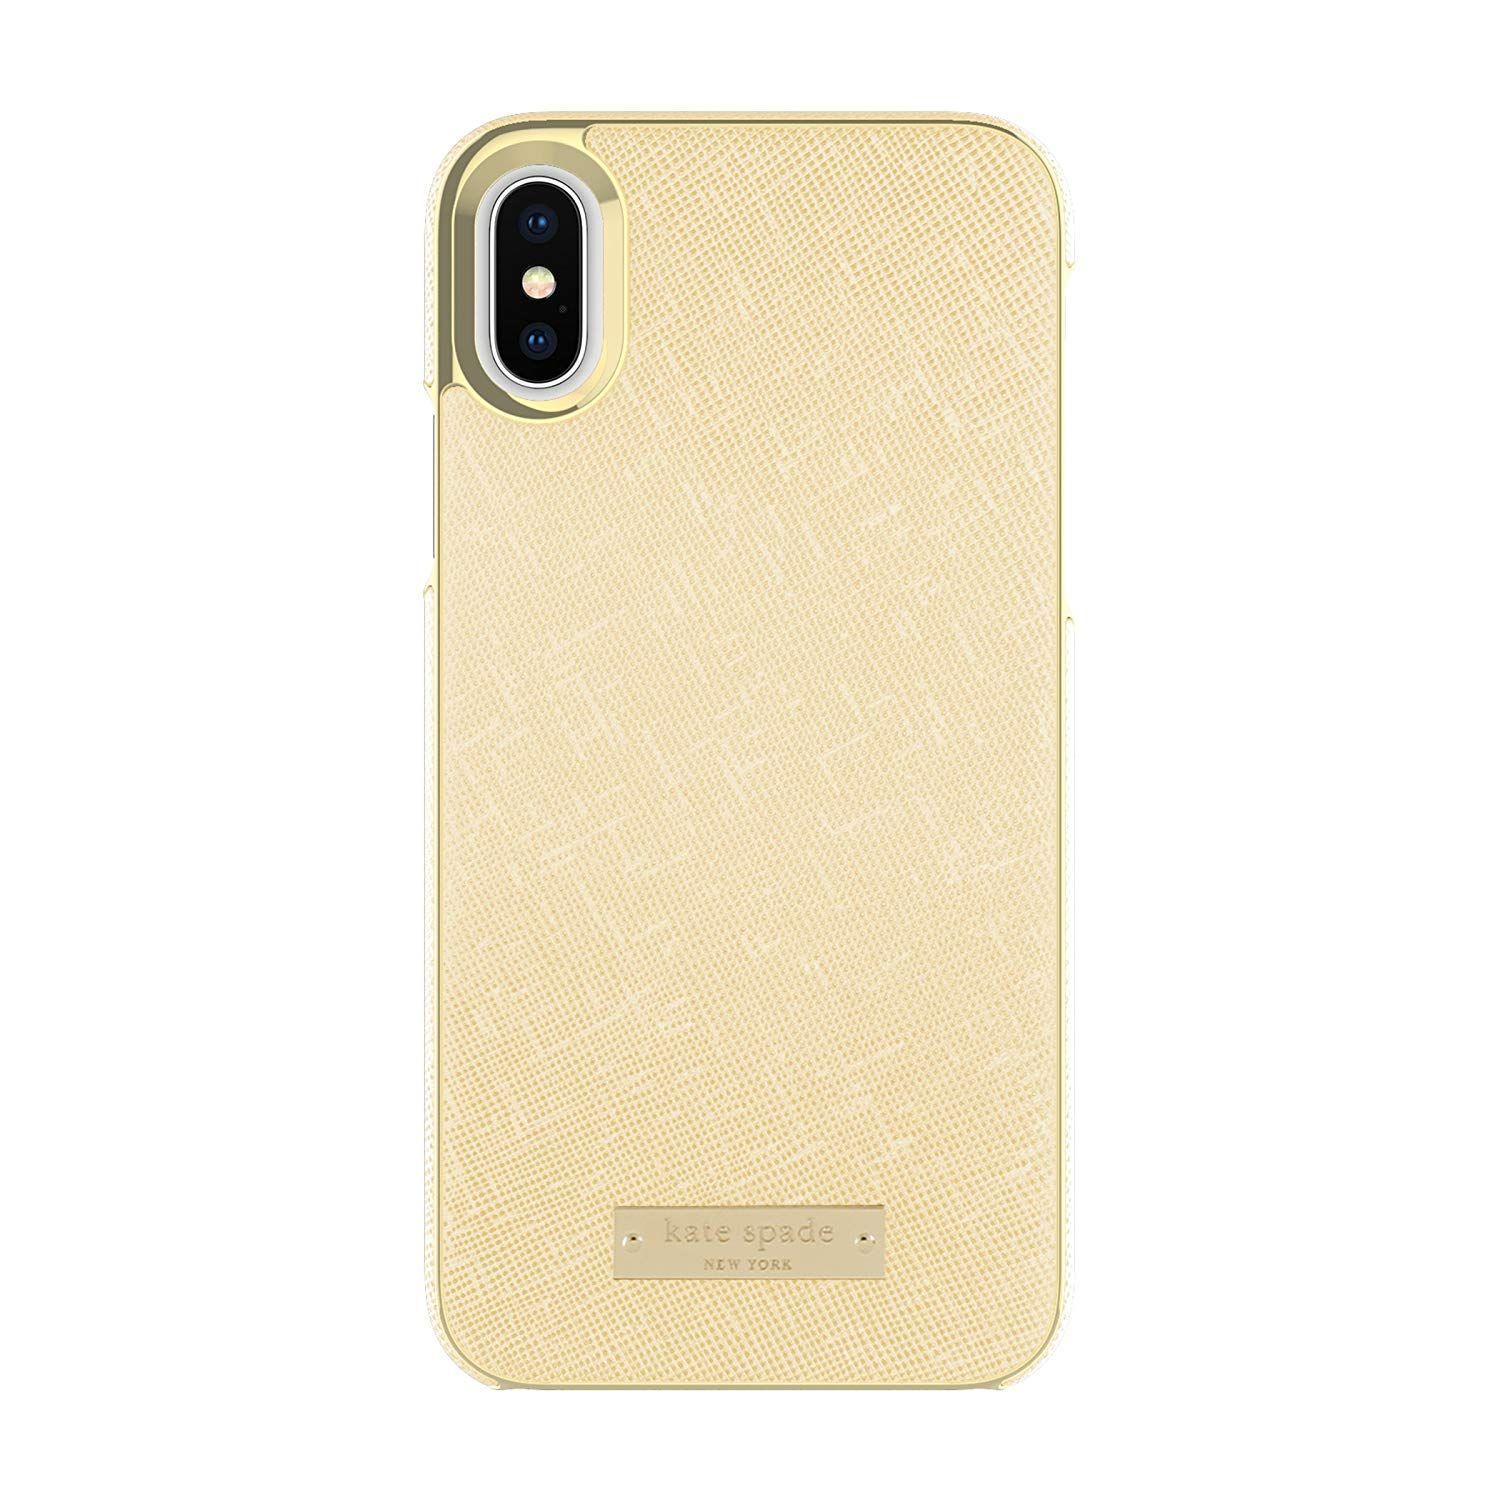 Gold iPhone Logo - kate spade new york Wrap Case for iPhone X